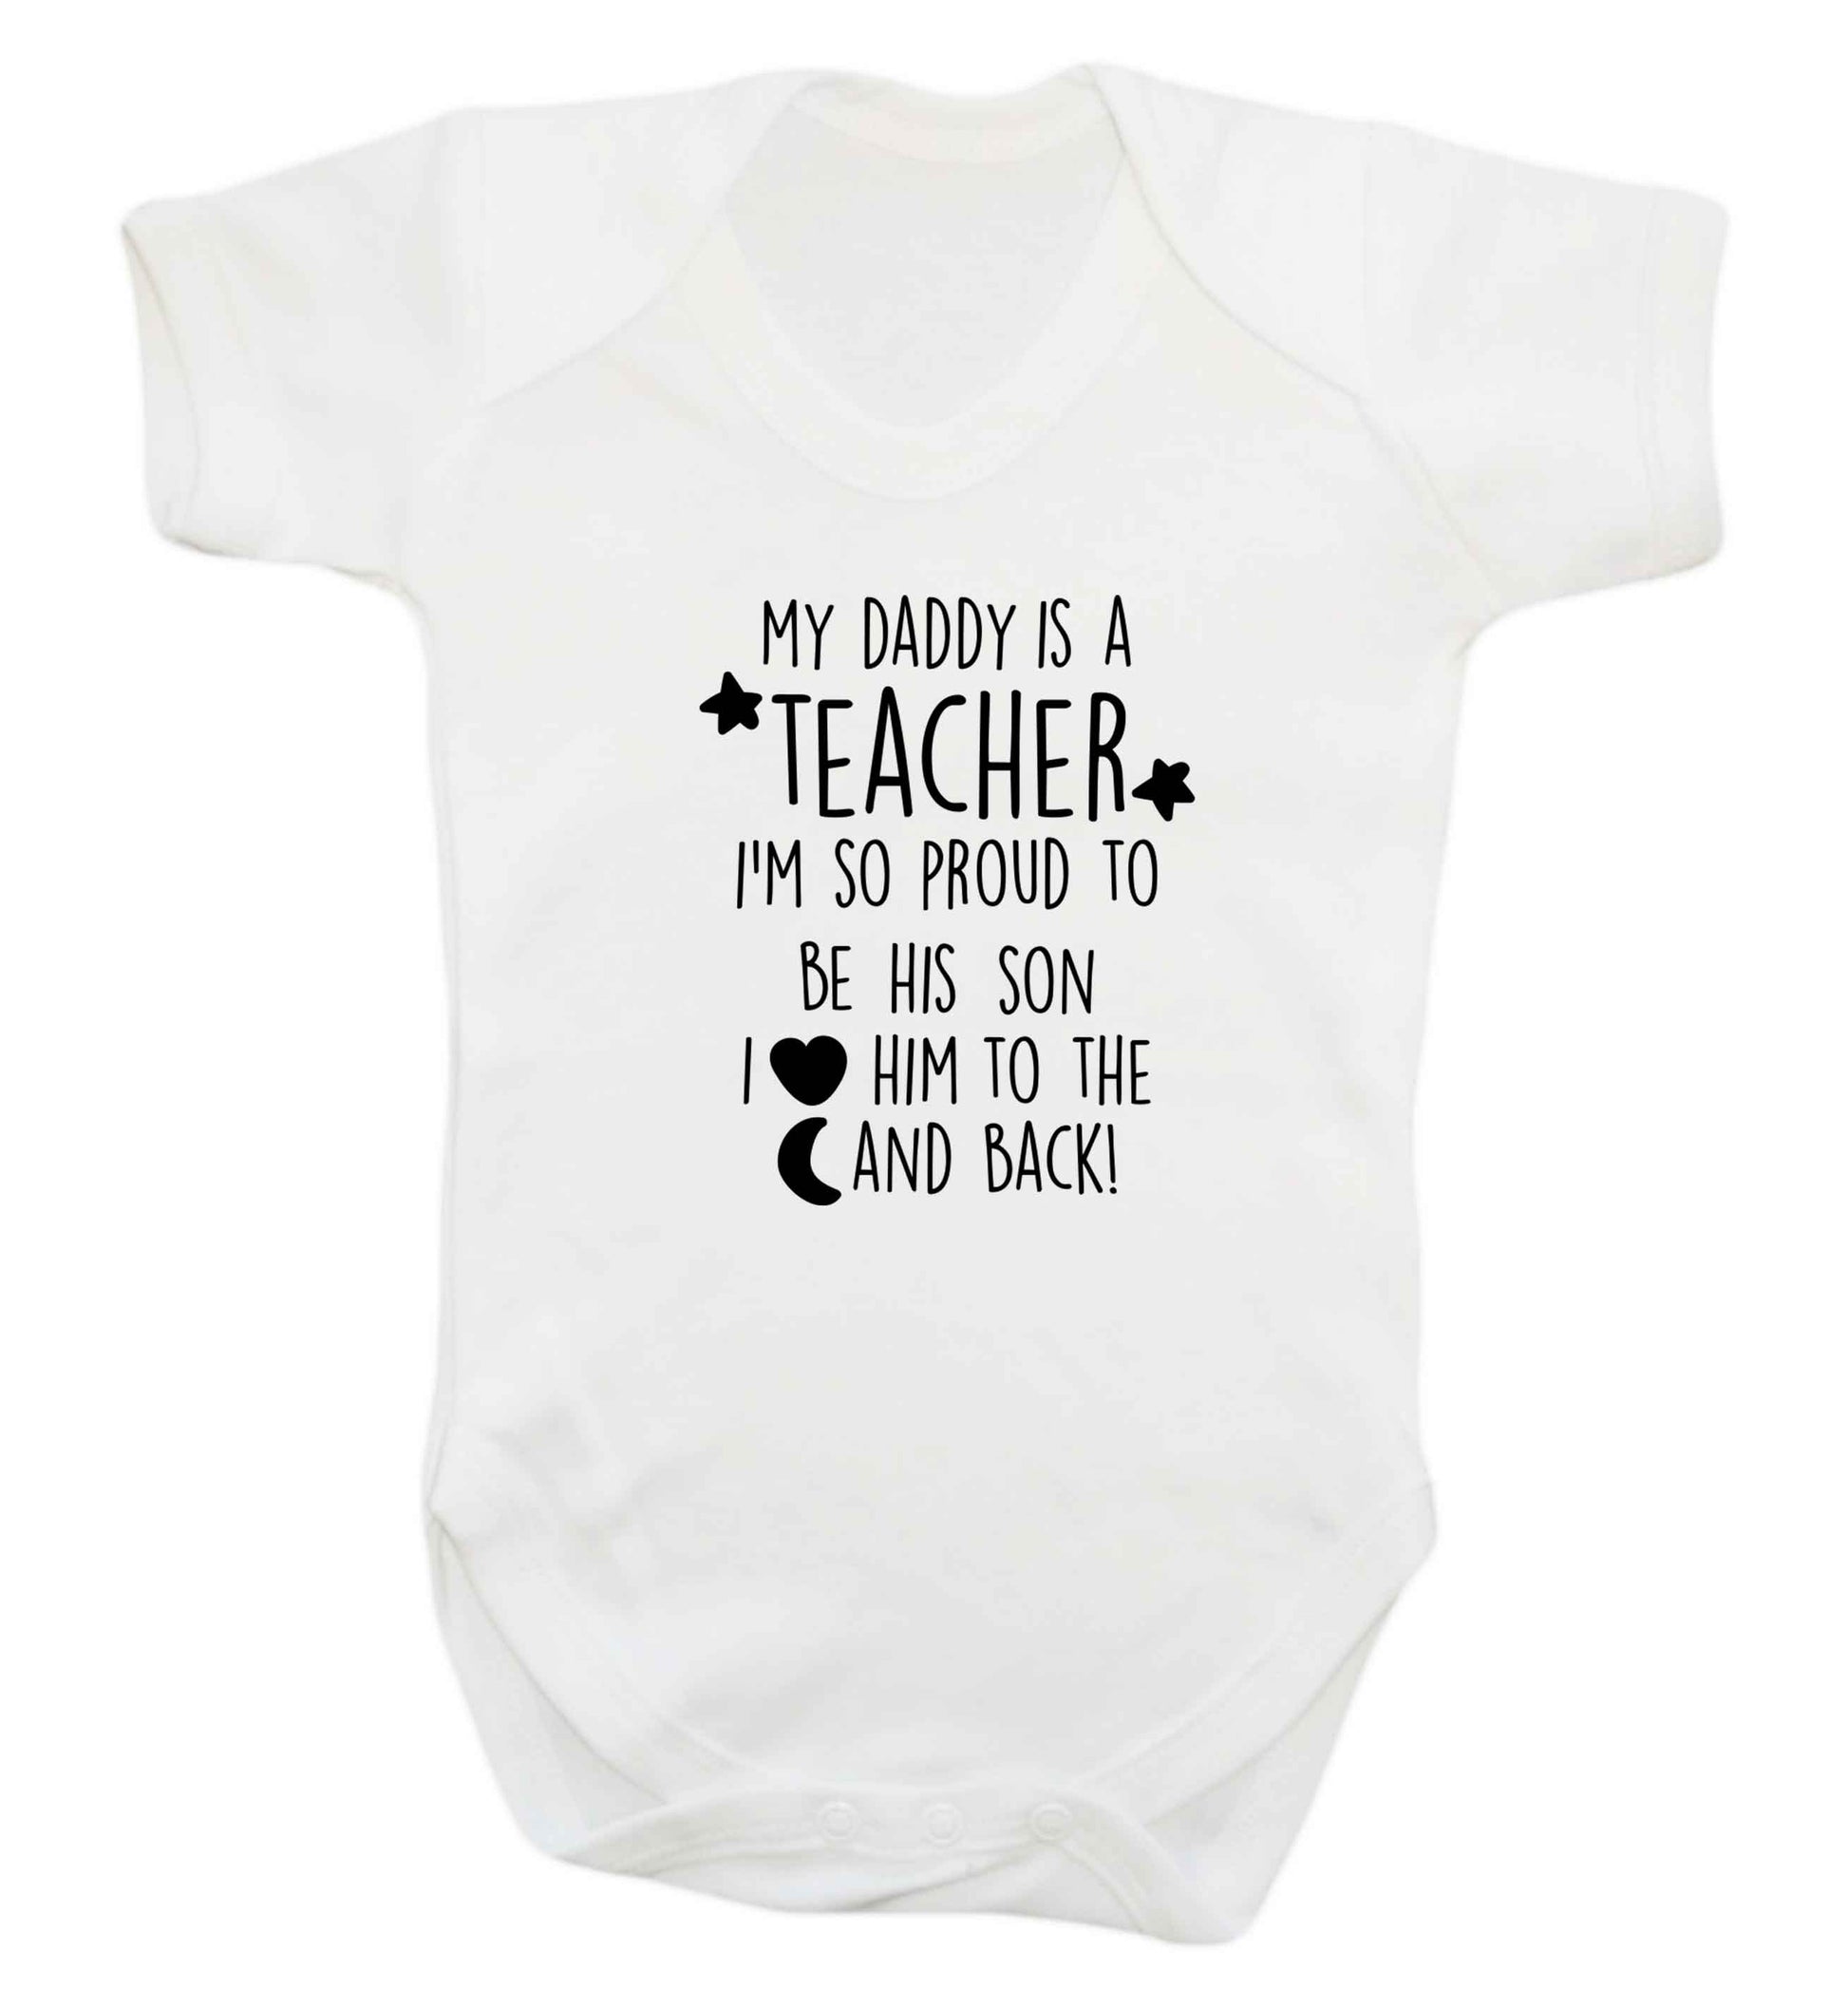 My daddy is a teacher I'm so proud to be his son I love her to the moon and back baby vest white 18-24 months